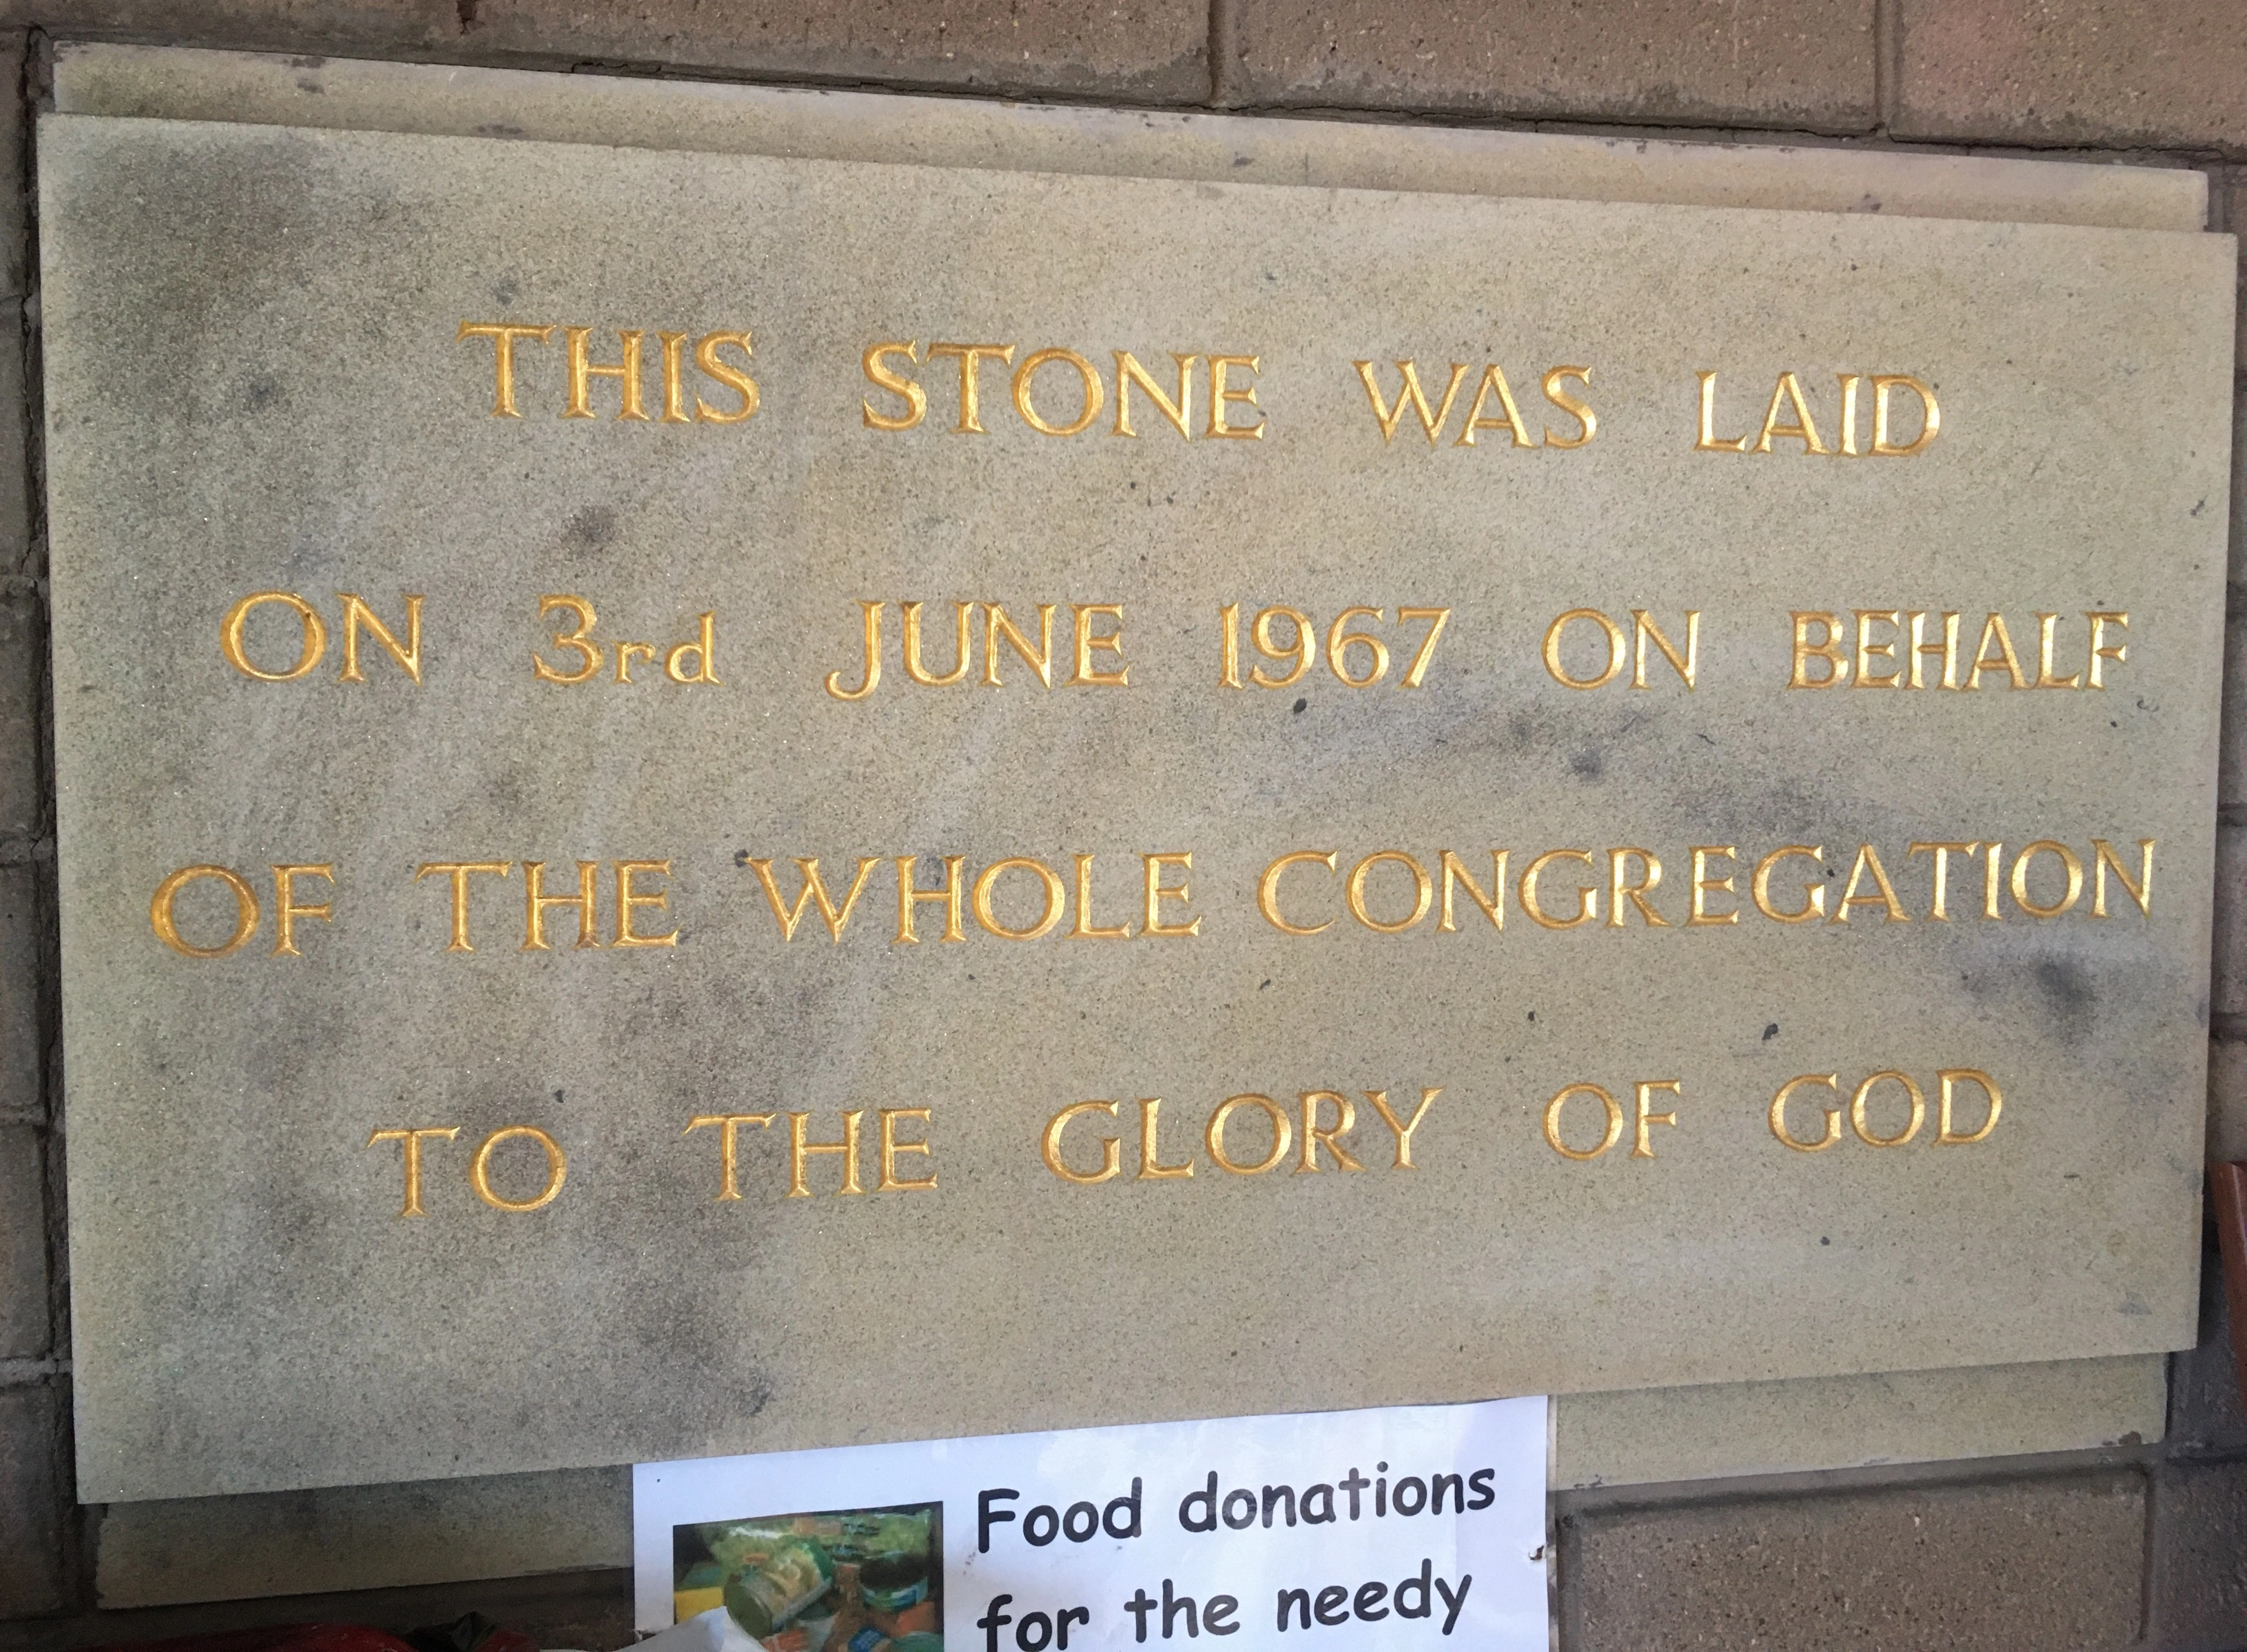 Grey stone with gold lettered inscription laid on behalf of the congregation commemorating the 1967 building of Lindale Methodist Church